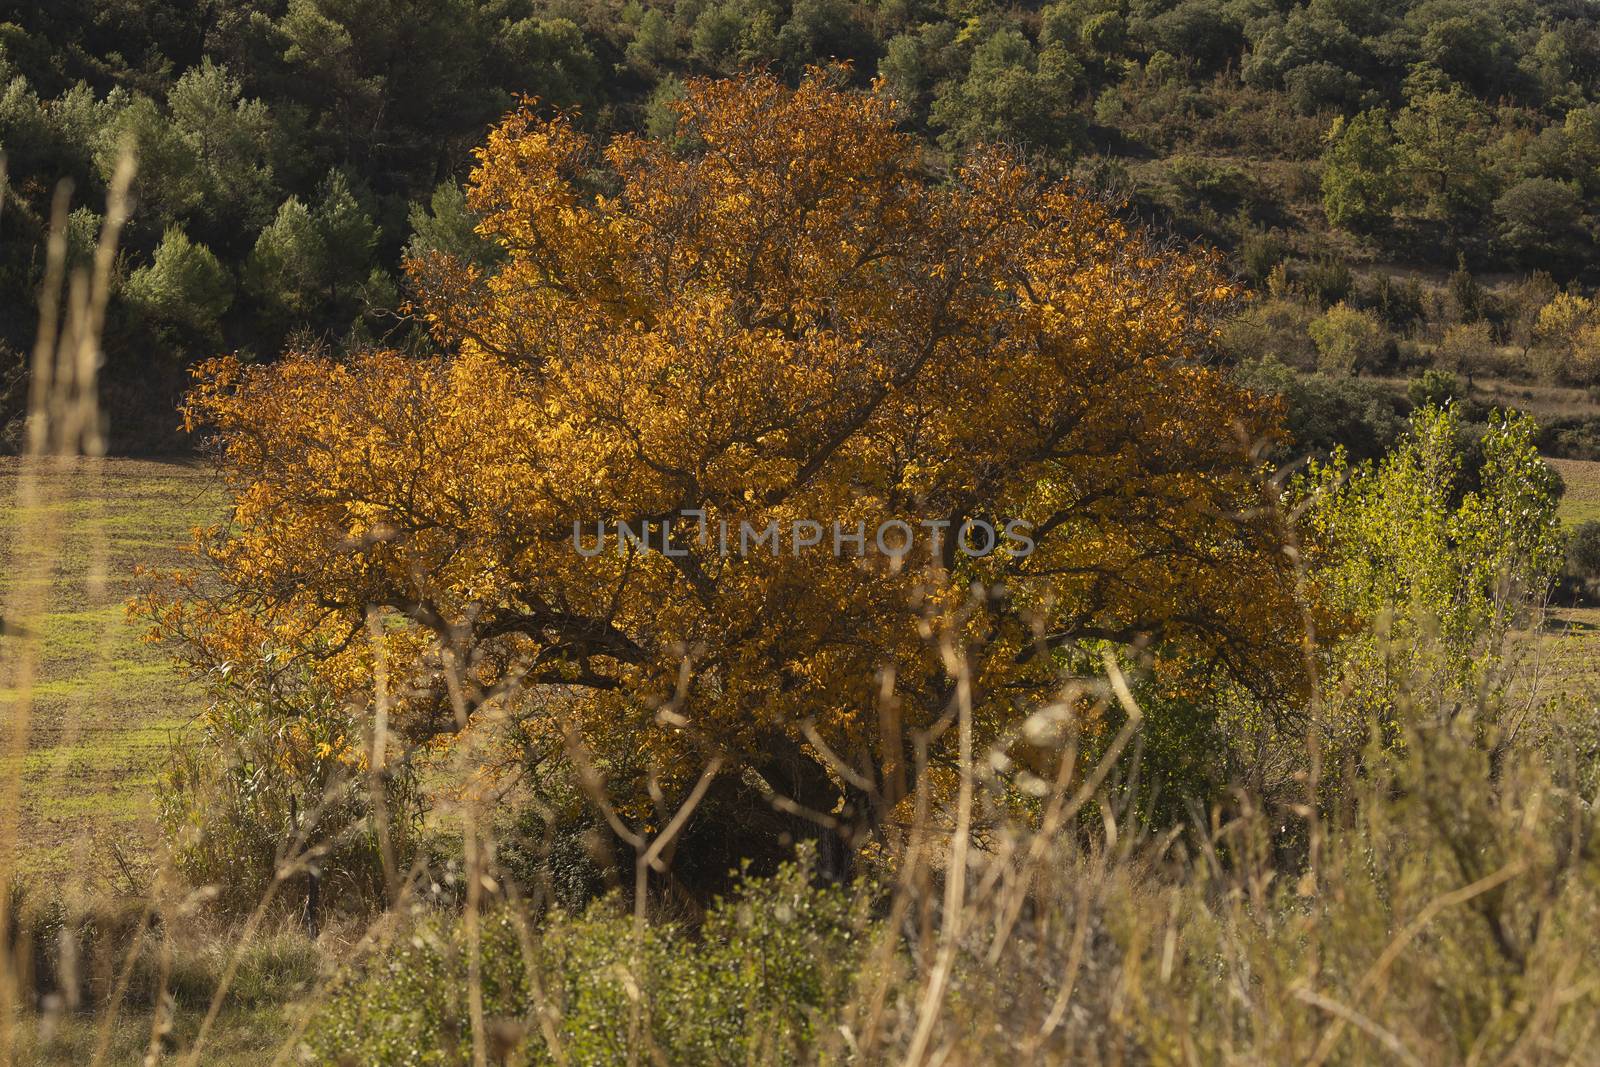 A beautiful walnut tree, dressed in autumn with yellow leaves, Spain by alvarobueno